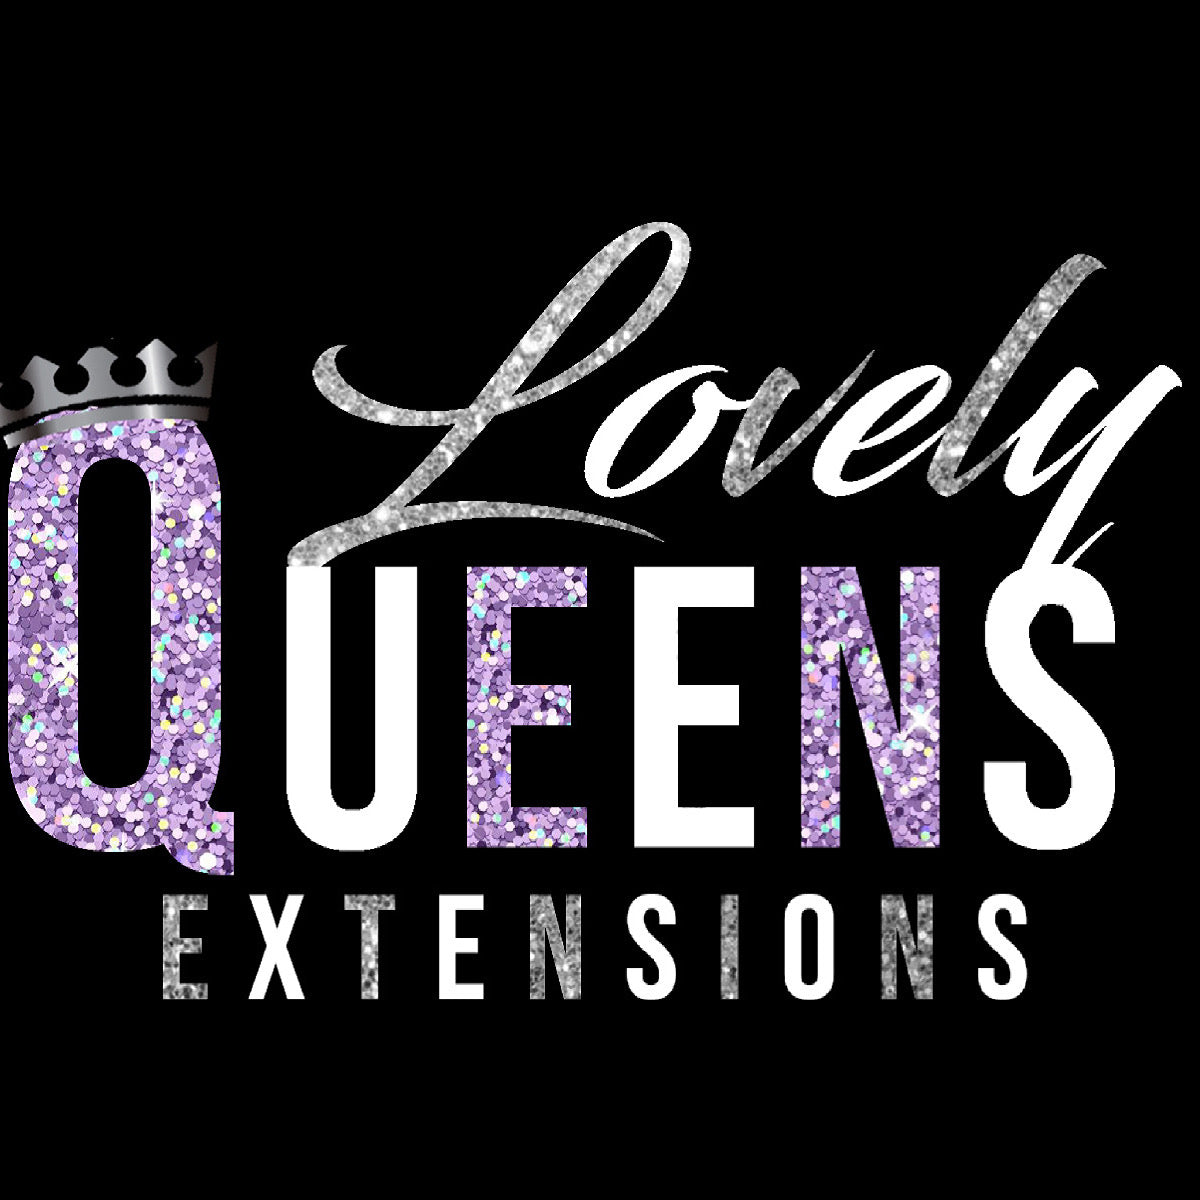 Lovelyqueensextensions